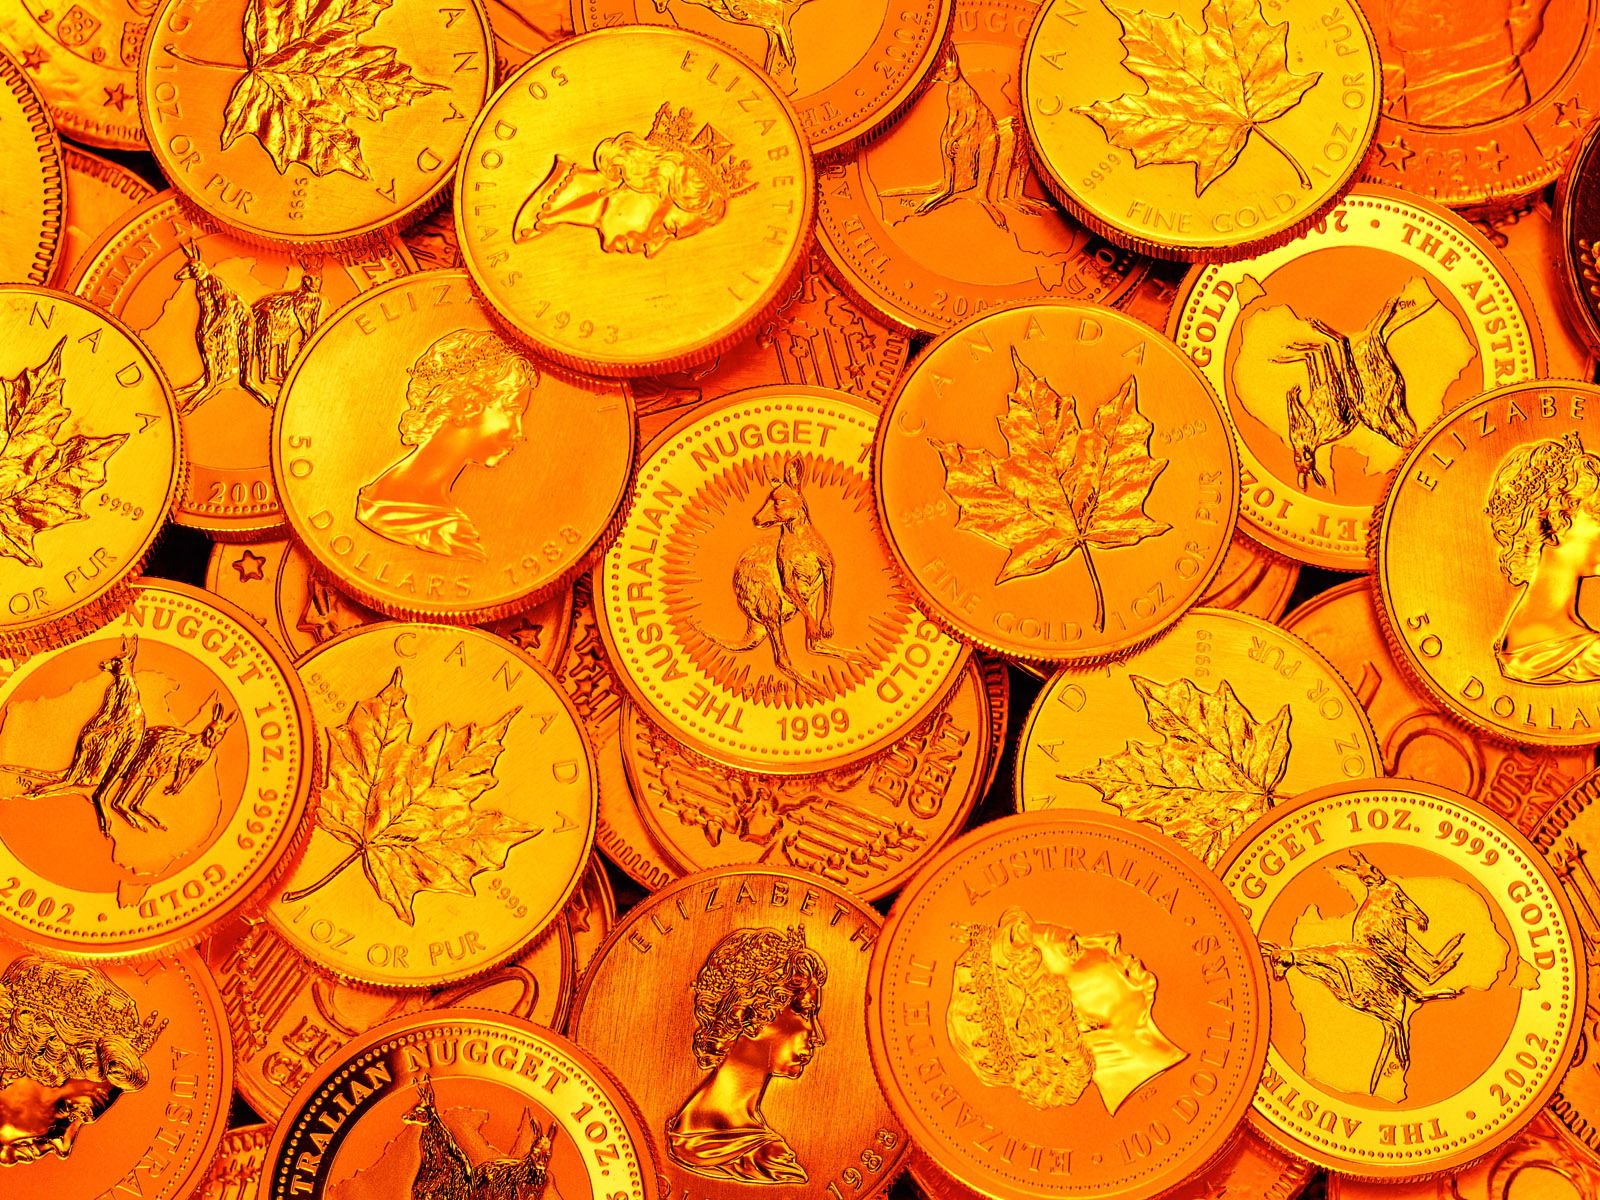 Canadian gold coins wallpaper and image, picture, photo